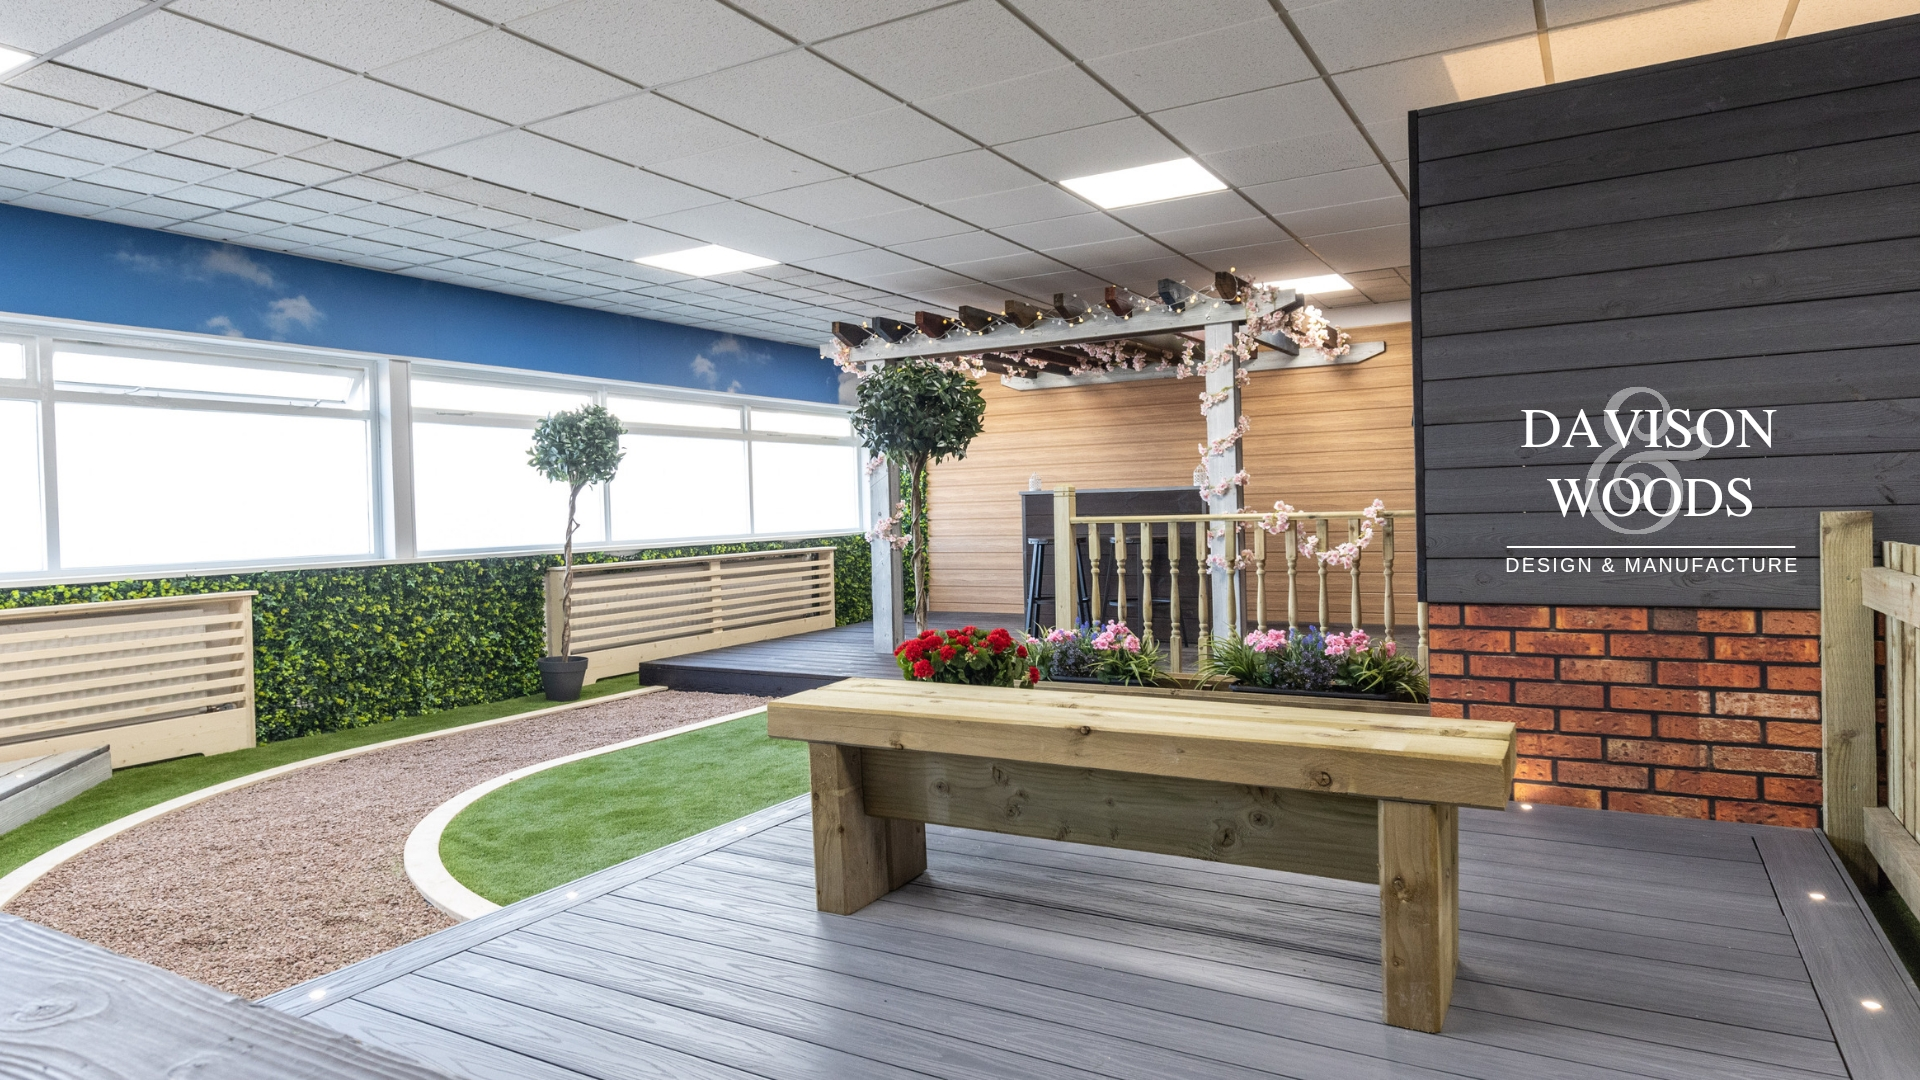 Grey timber decking and built in lights, in the centre, a light brown timber bench made from BSW railway sleepers. To the left, a pink gravel path leads onto the pergola section in the background.